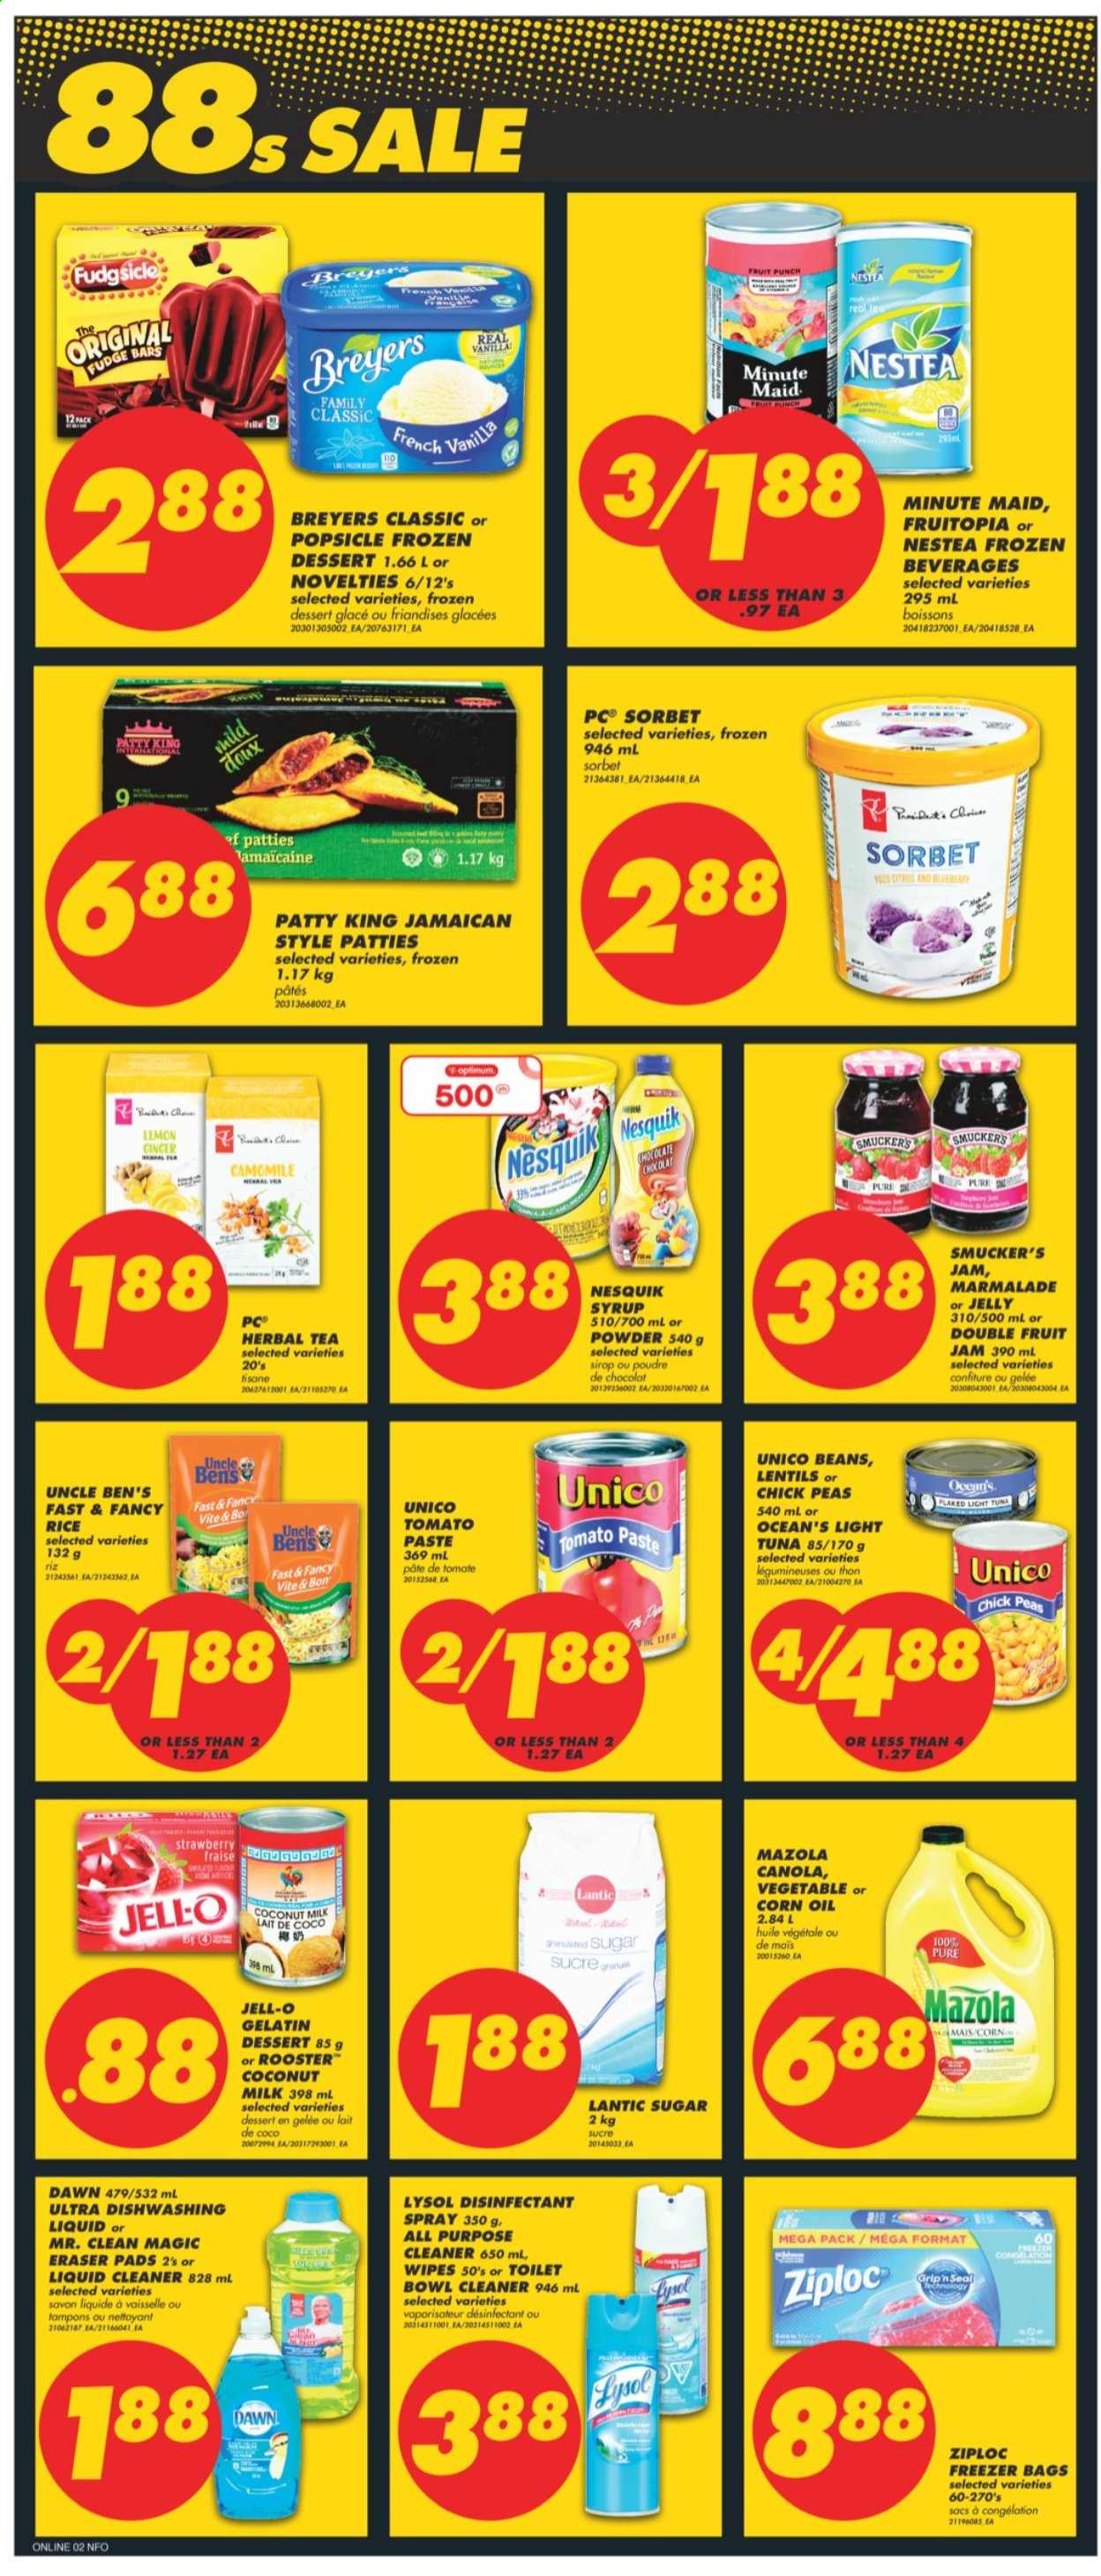 thumbnail - No Frills Flyer - August 19, 2021 - August 25, 2021 - Sales products - peas, tuna, fudge, jelly, sugar, Jell-O, coconut milk, lentils, tomato paste, light tuna, Uncle Ben's, rice, corn oil, fruit jam, syrup, fruit punch, tea, herbal tea, wipes, cleaner, liquid cleaner, all purpose cleaner, Lysol, dishwashing liquid, tampons, antibacterial spray, bag, Ziploc, freezer bag, eraser, Optimum, Nesquik, desinfection. Page 8.